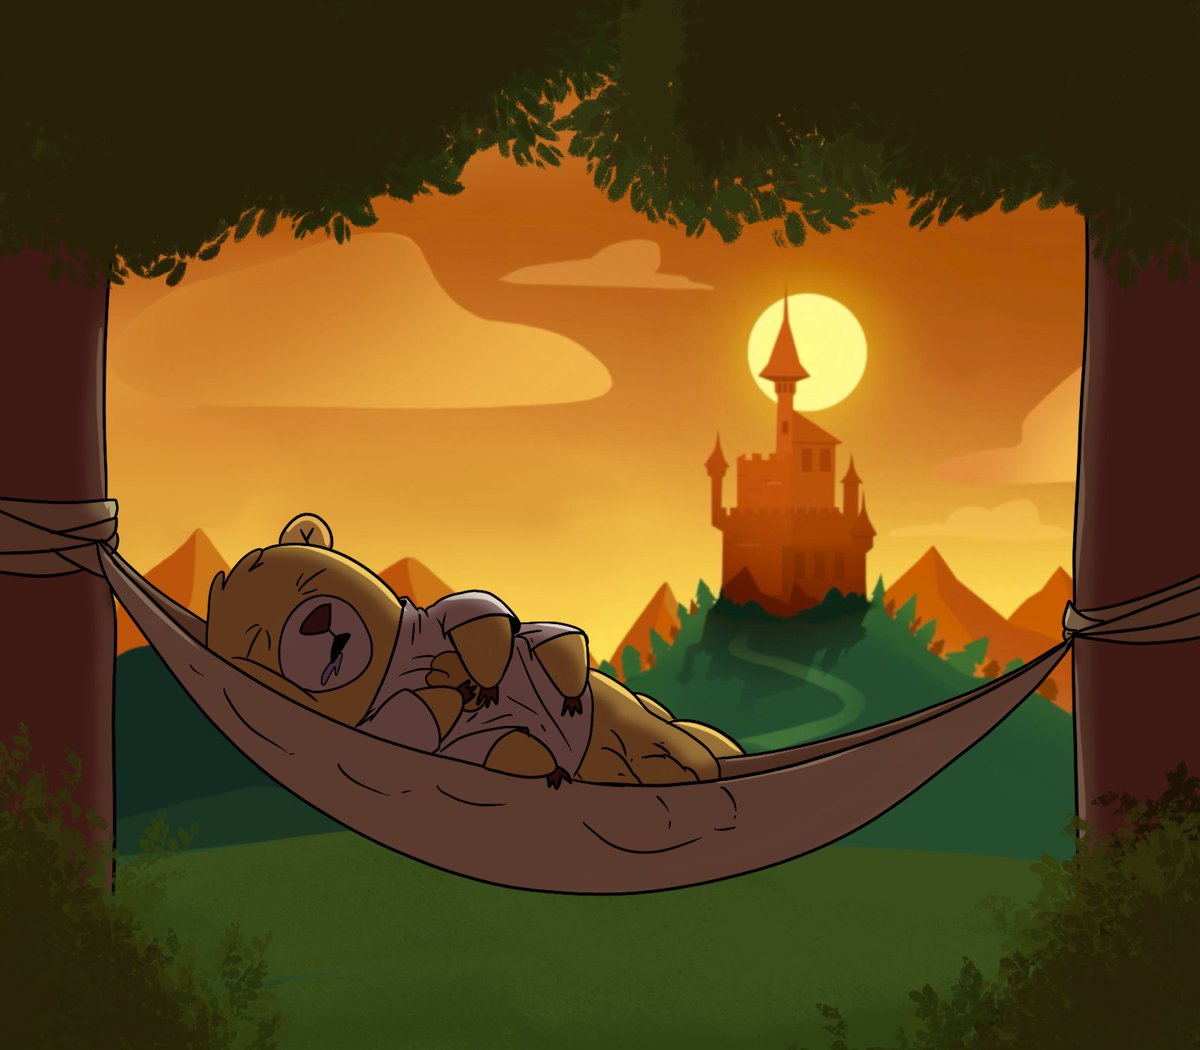 Bear-y relaxed on this hilltop hammock! Catching some Zzz's amidst nature's embrace.💤 Will be hibernating until May 6th.